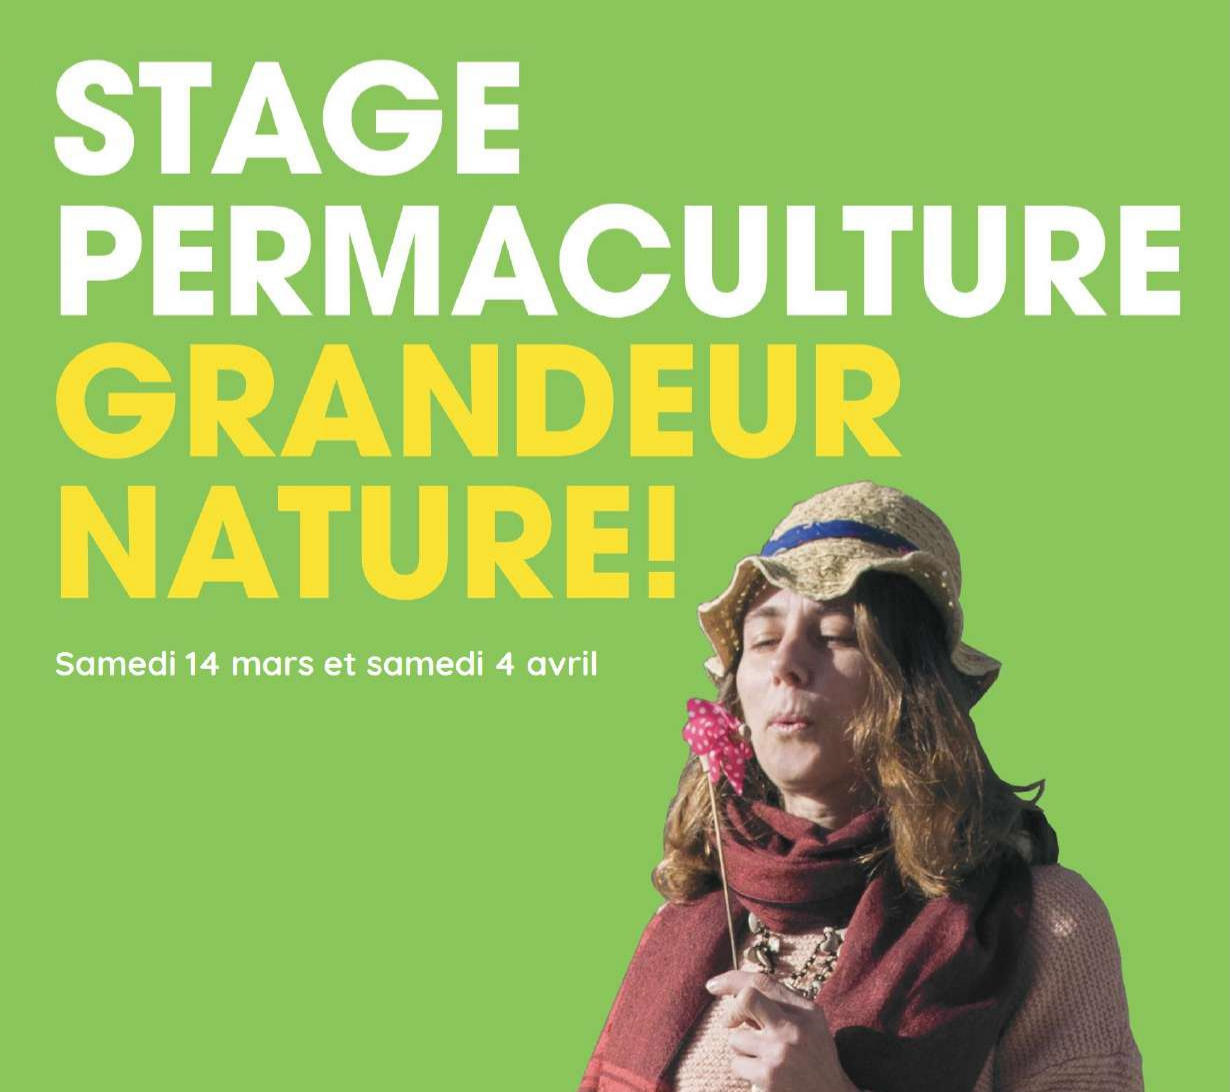 STAGE PERMACULTURE